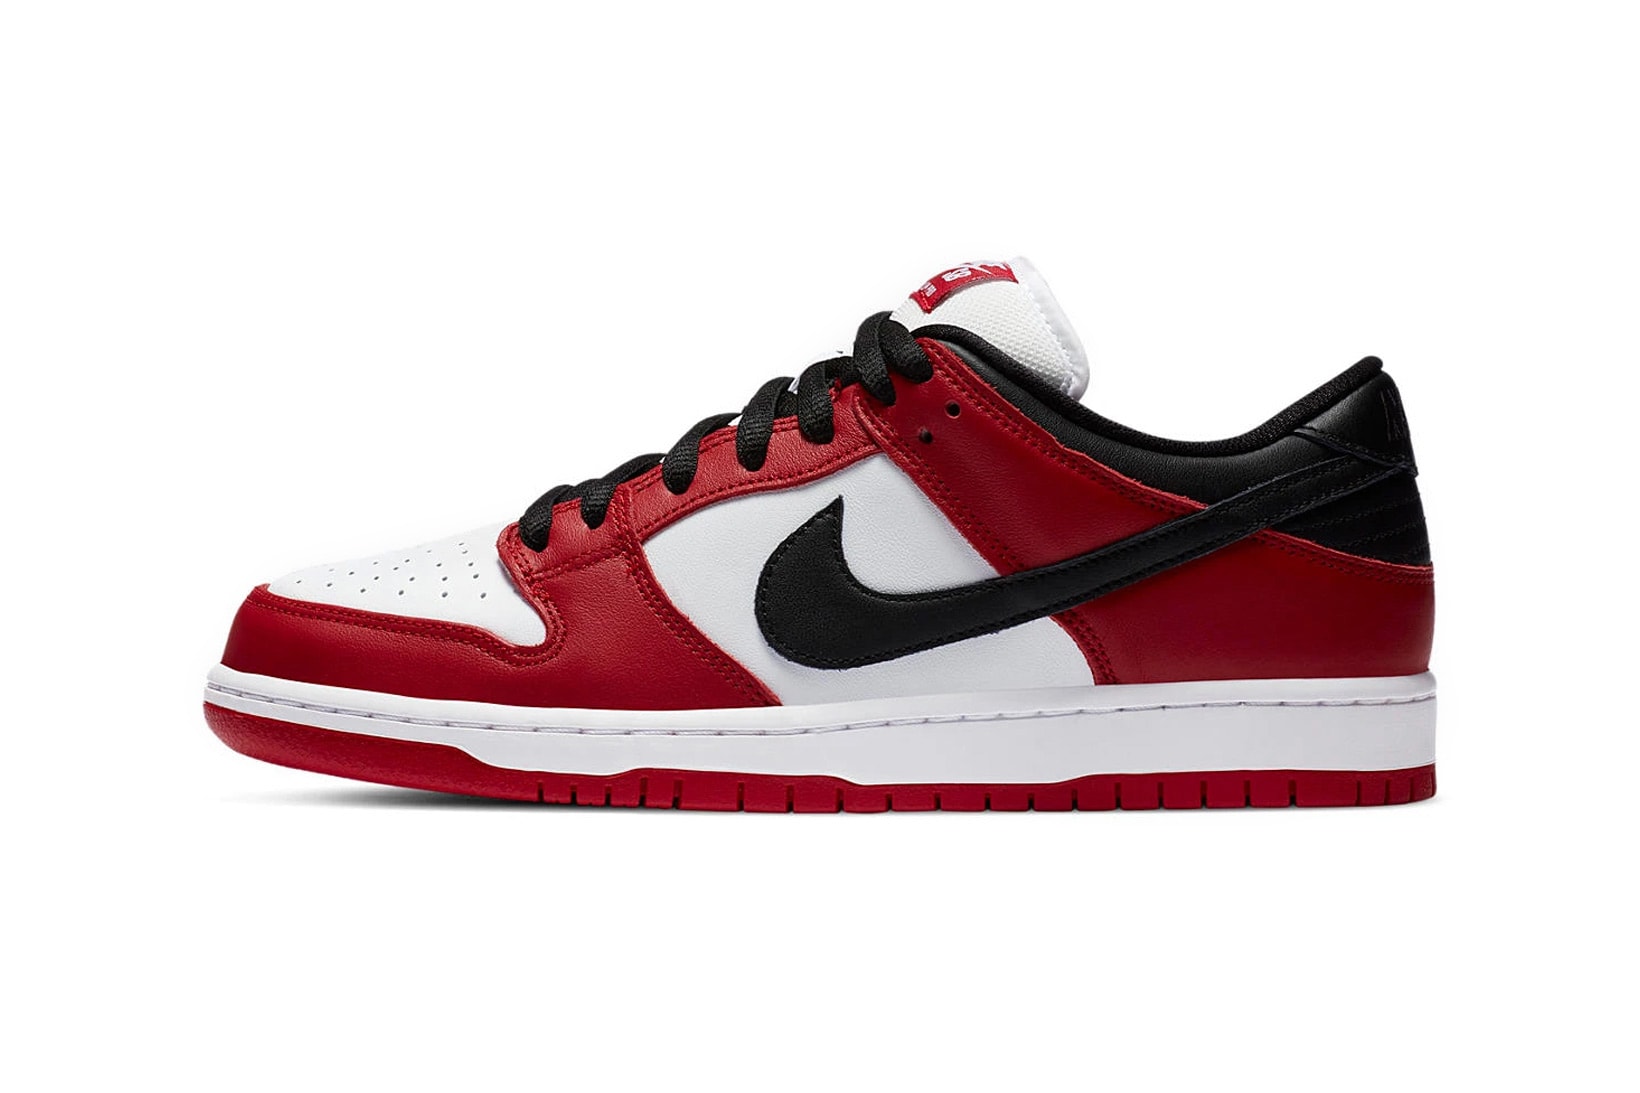 nike sb dunk low chicago red black white release info end sneakers air jordan 1